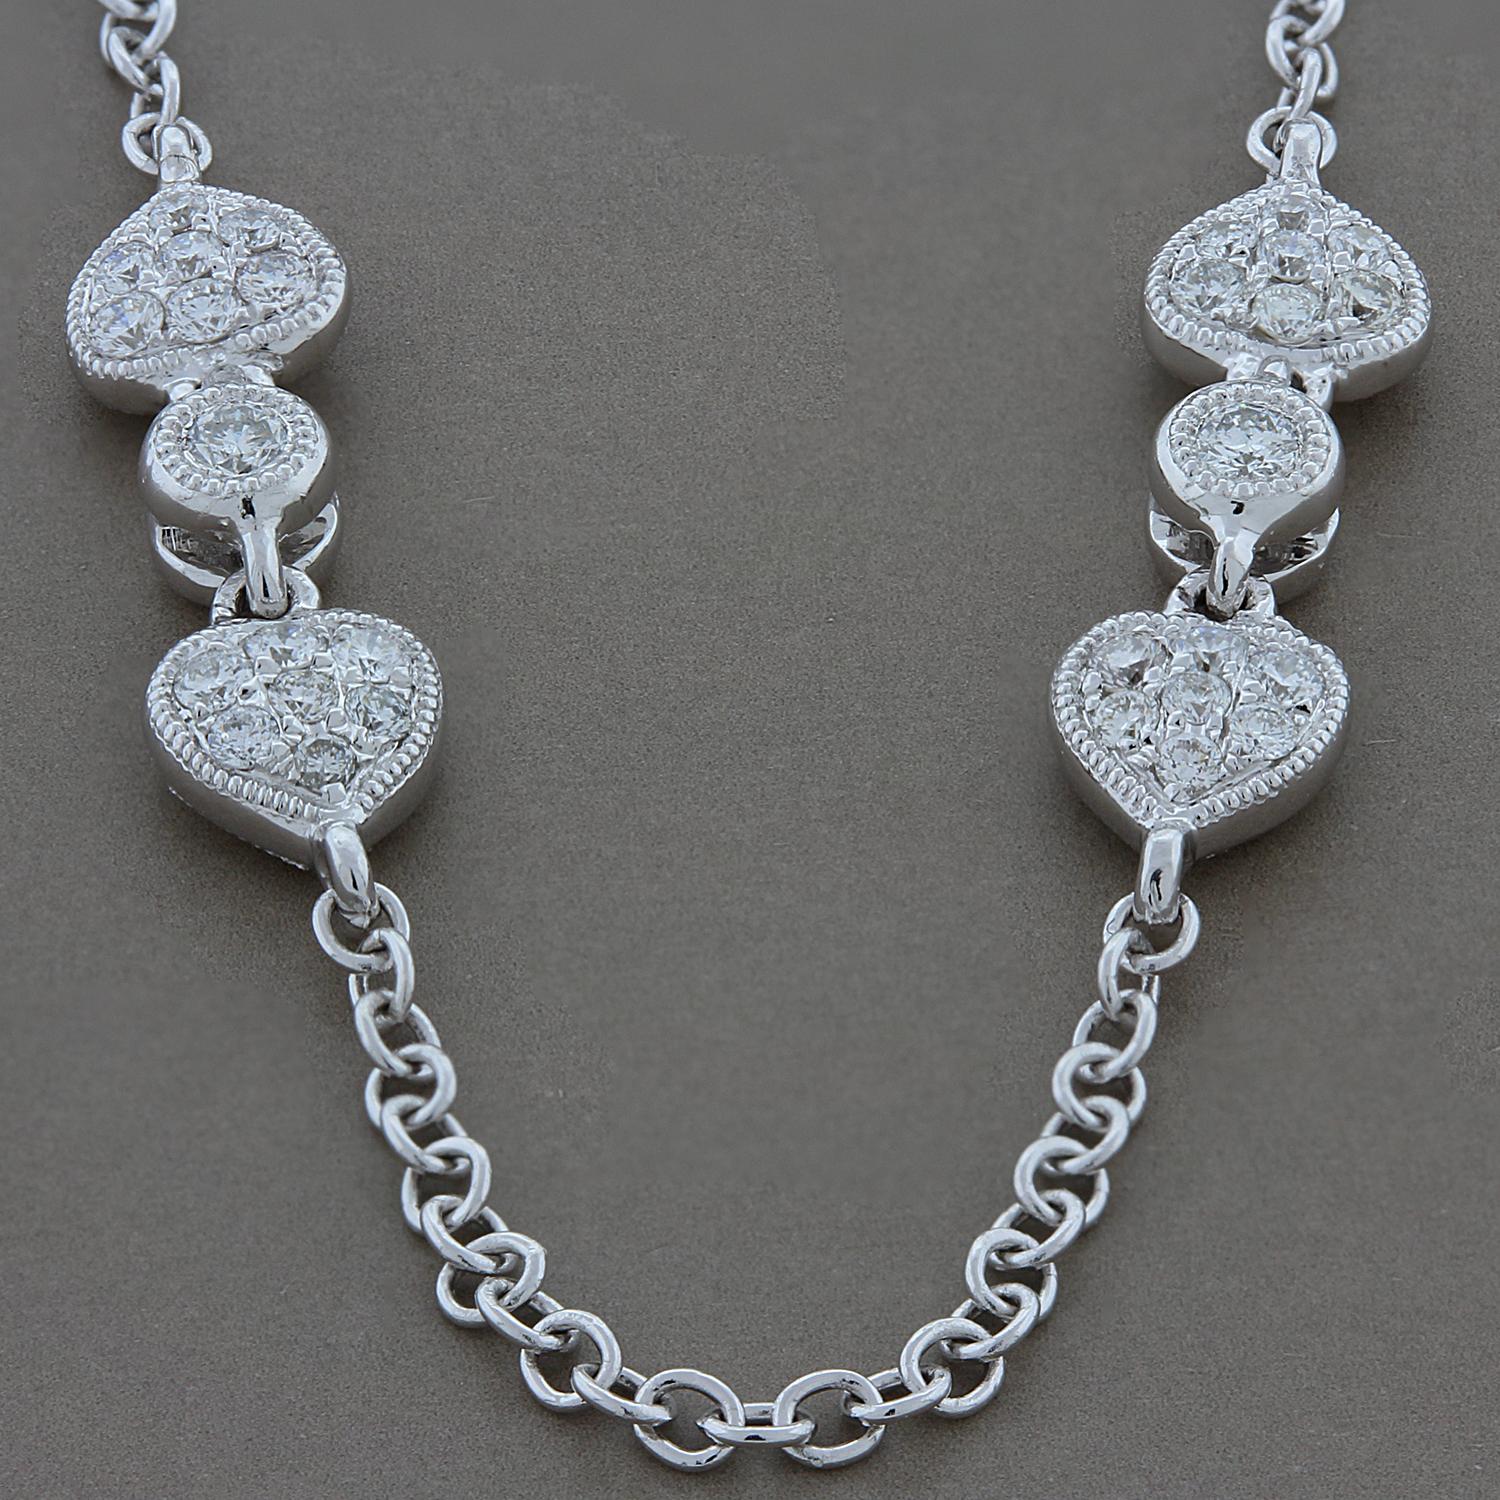 Two of Hearts! A diamond by the yard style necklace with diamond studded hearts. 2.06 carats of round VS quality diamonds are set in 18K white gold. The diamonds are set on the two sides of the hearts for a glisten with every turn.

Necklace Length: